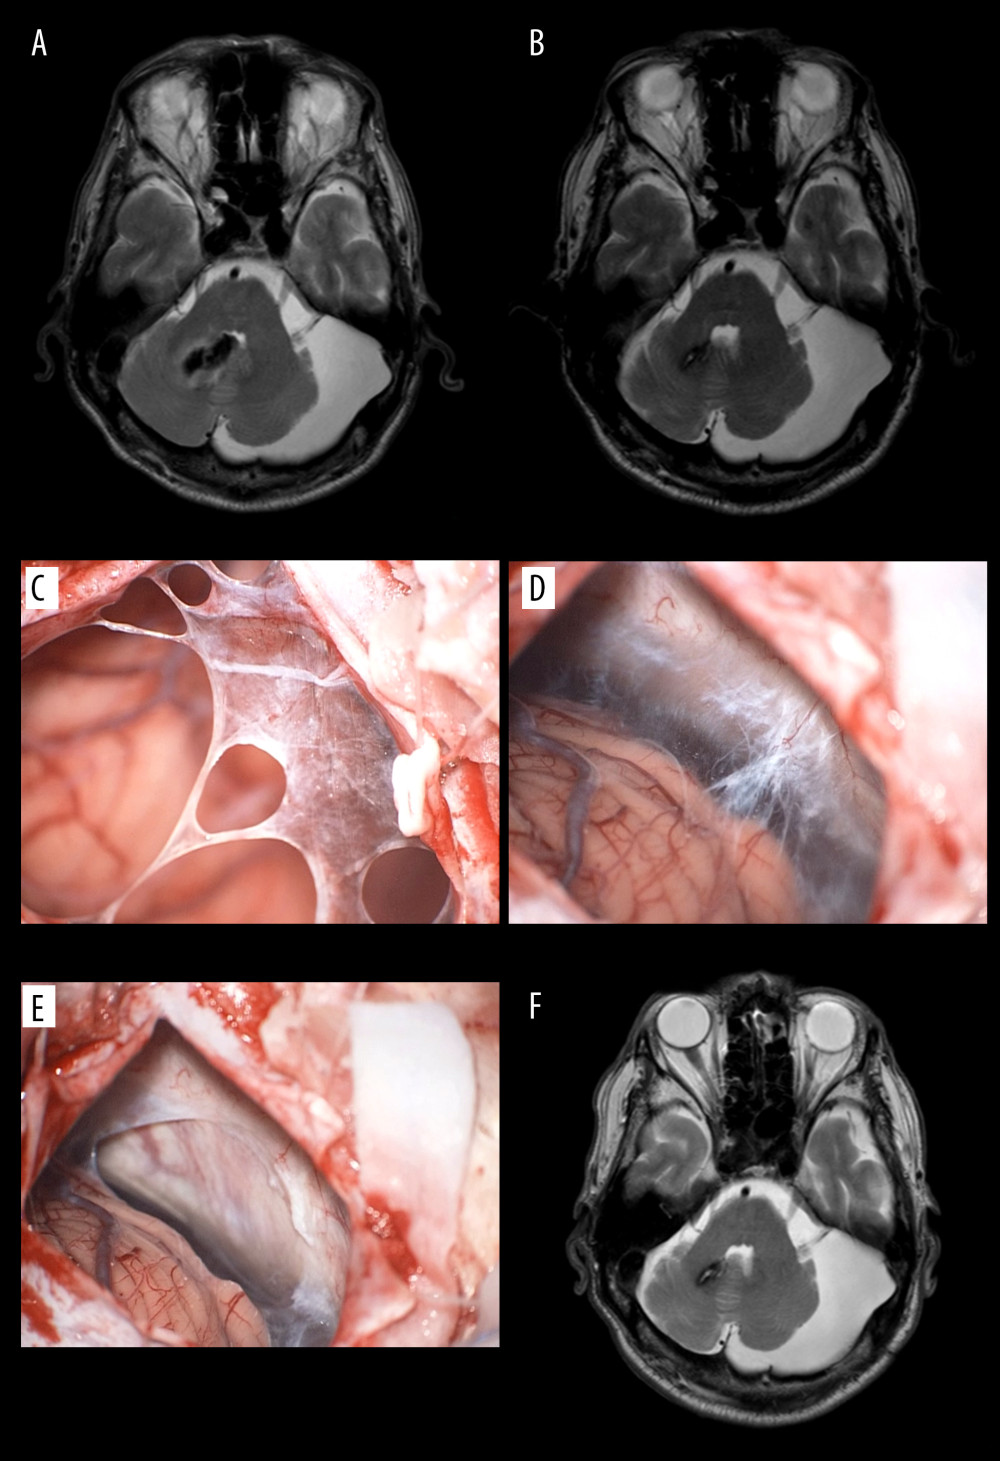 Magnetic resonance images and operative photos of Case 2. Cerebellar hemorrhage, (A) as a low-intensity mass in T2-weighted image (T2WI), became smaller in size (B). The associated high-intensity mass on the left cerebellopontine angle in T2WI showed little change in size 13 months later, which lead to the surgical procedure. The retrocerebellar cavity wall was thin and fairly vascularized (C), while the wall on the side of the cerebellar tentorium was partially thickened (D). The cavity was located in the intra-arachnoid layer (E). The cavity wall of the left cerebellopontine angle was resected, but the cavity size showed no change (F).